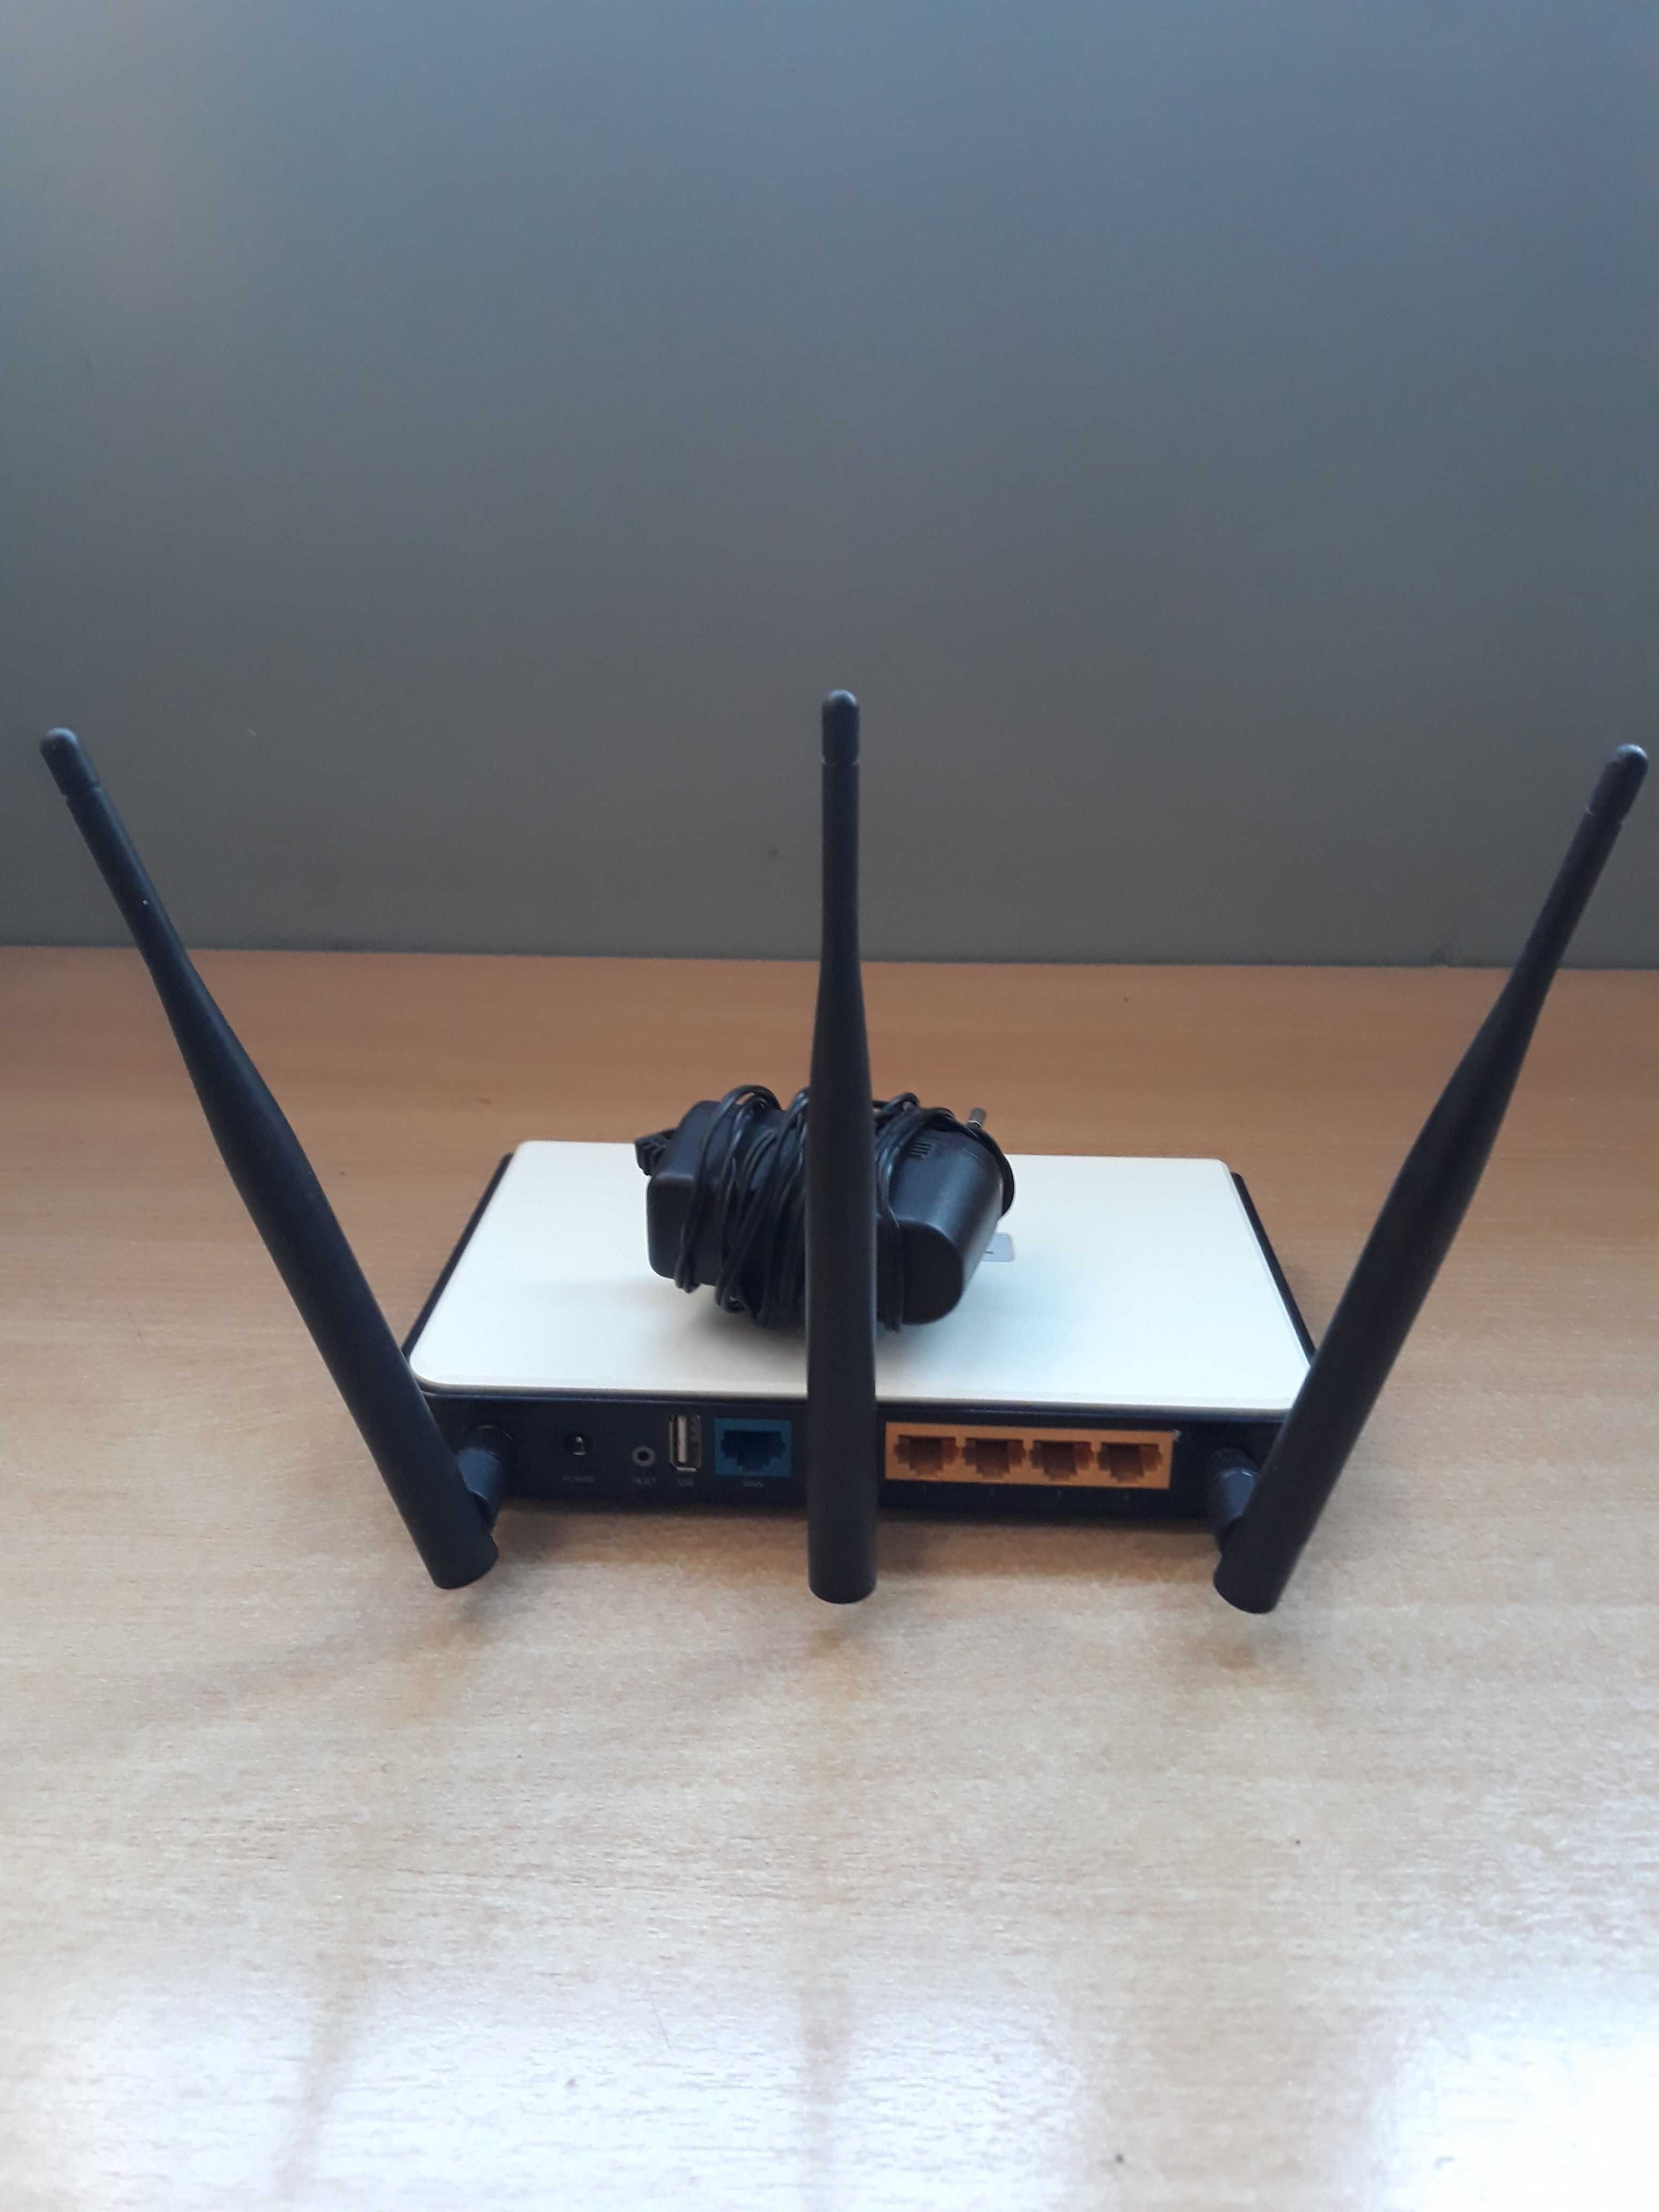 Router TP-LINK tl-wr1043nd